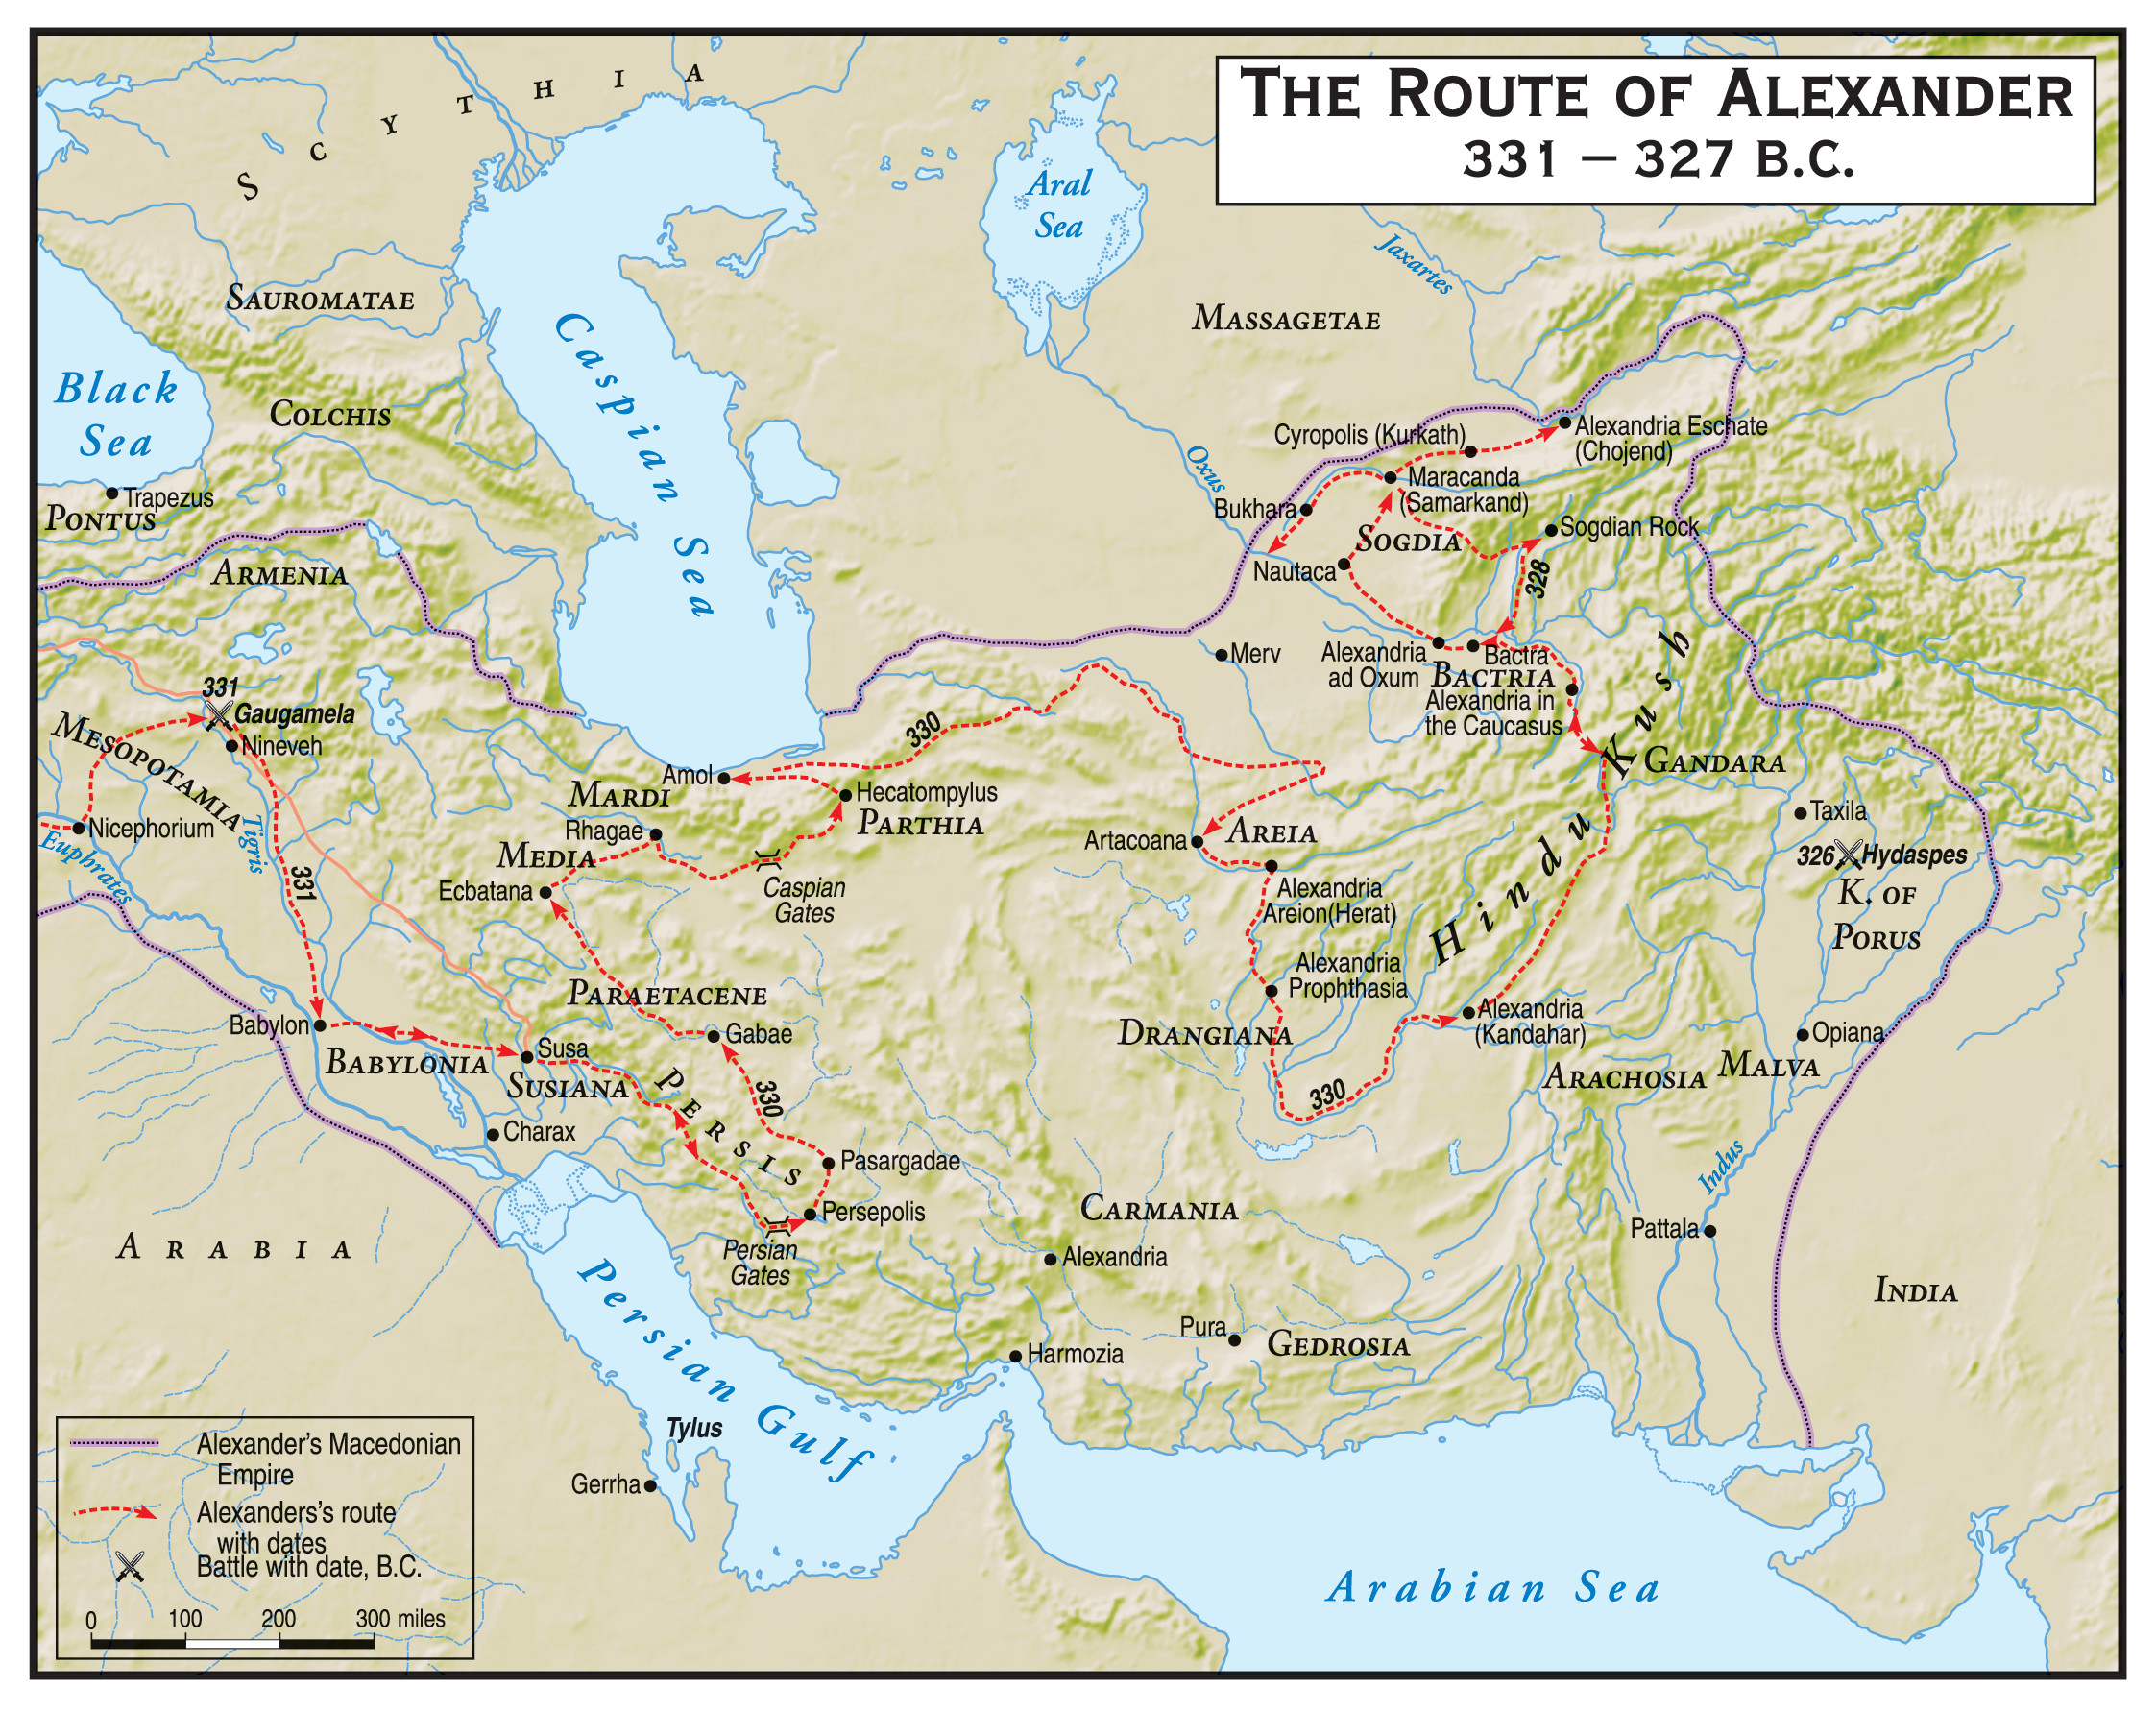 The route of Alexander and his army and the extent of his empire. Before reaching India, Alexander spent years in the region of modern Afghanistan. The work there wearied both men and ruler.